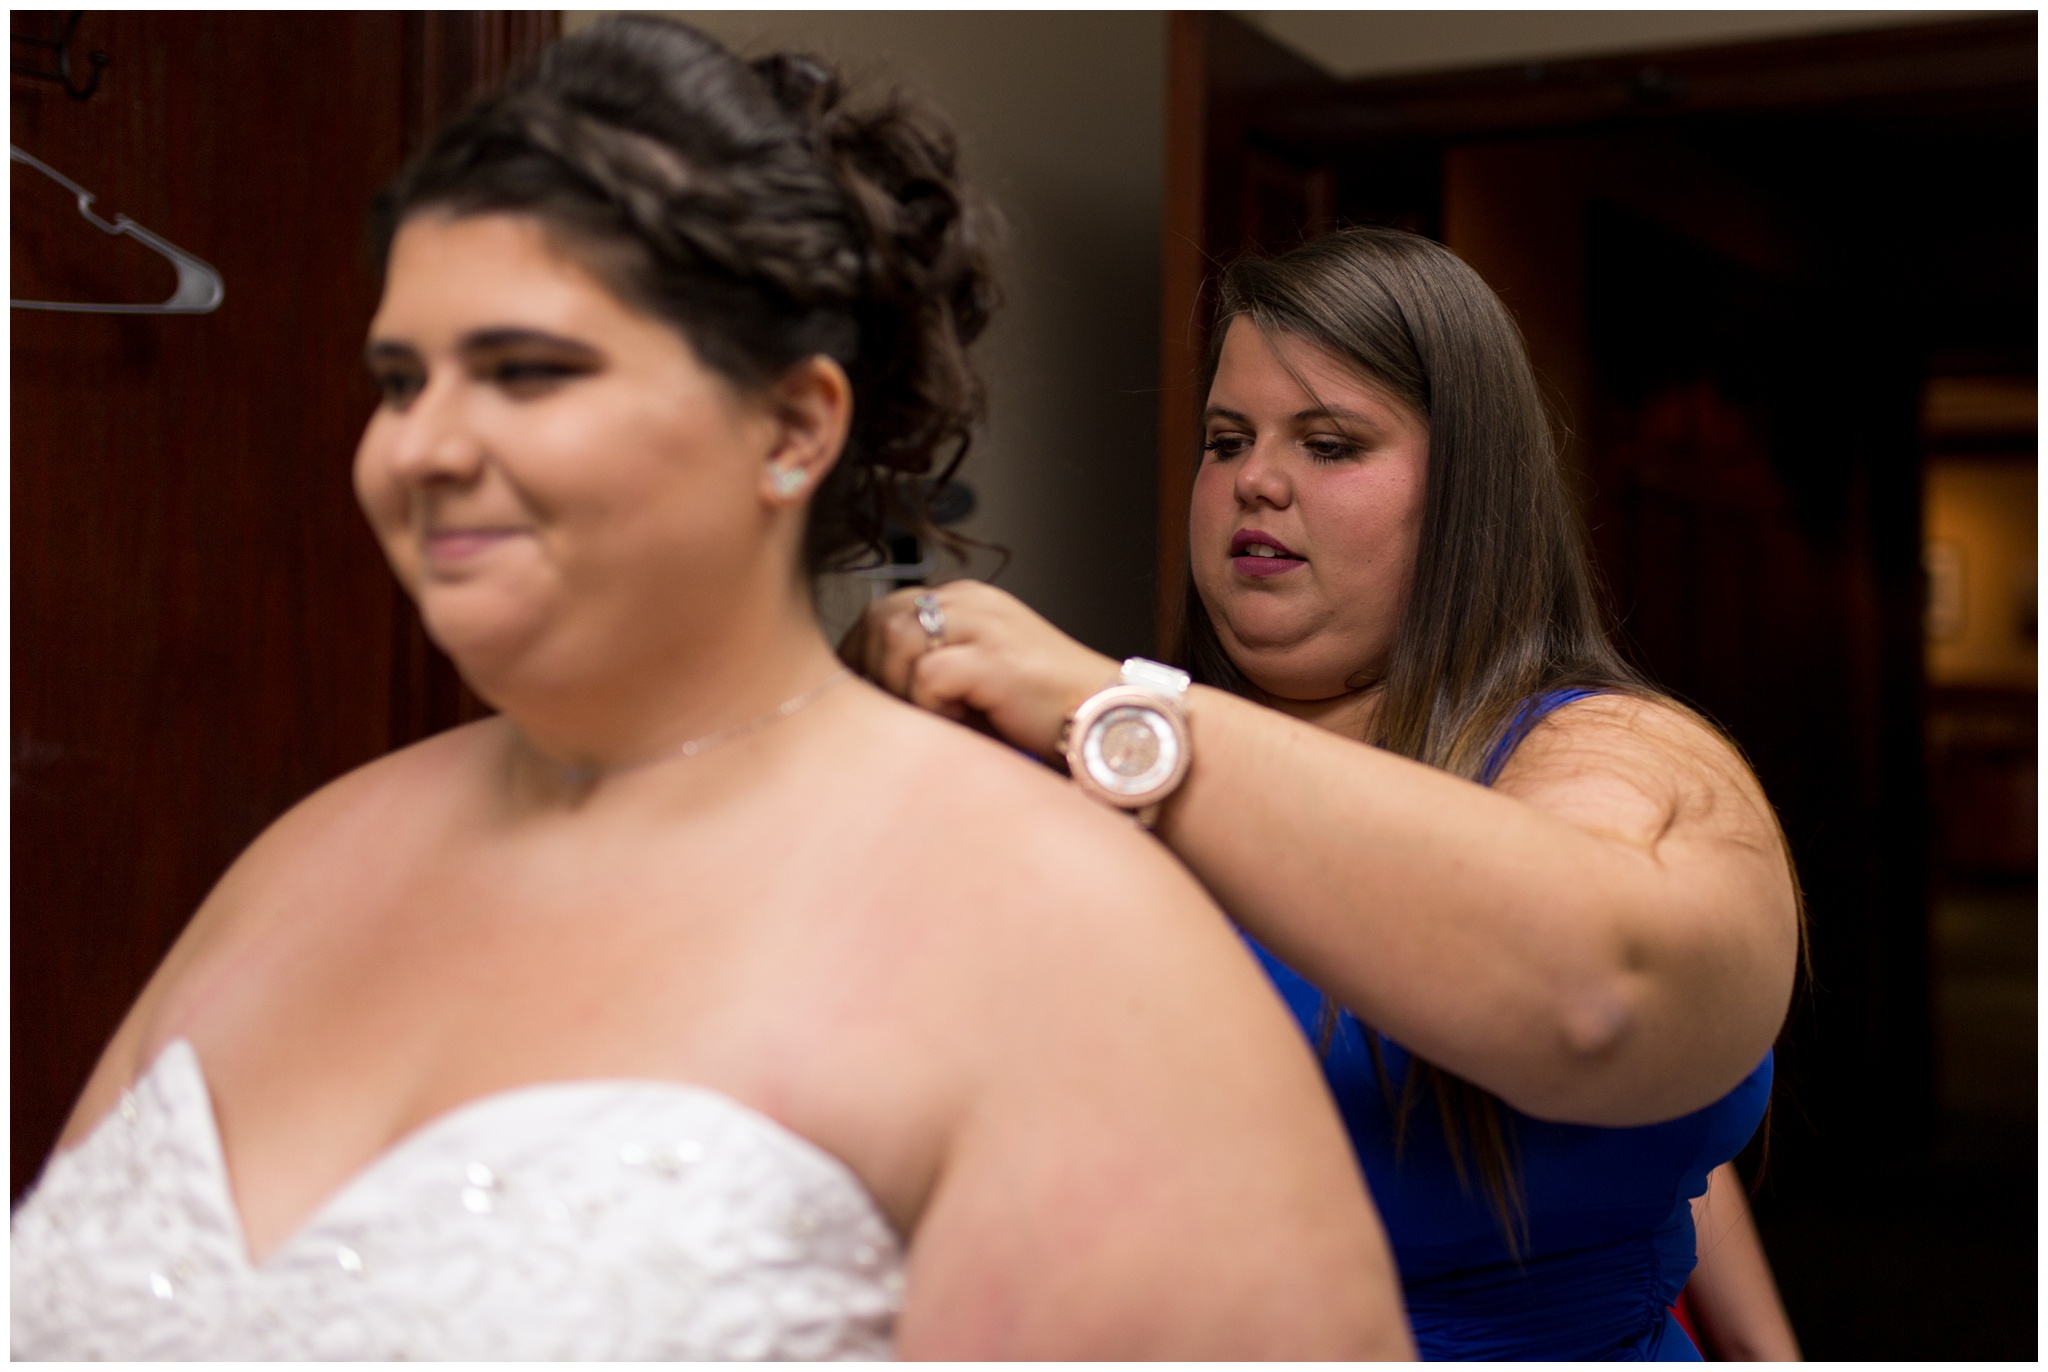 maid of honor putting on bride's necklace before Community Life Center wedding in Indianapolis Indiana